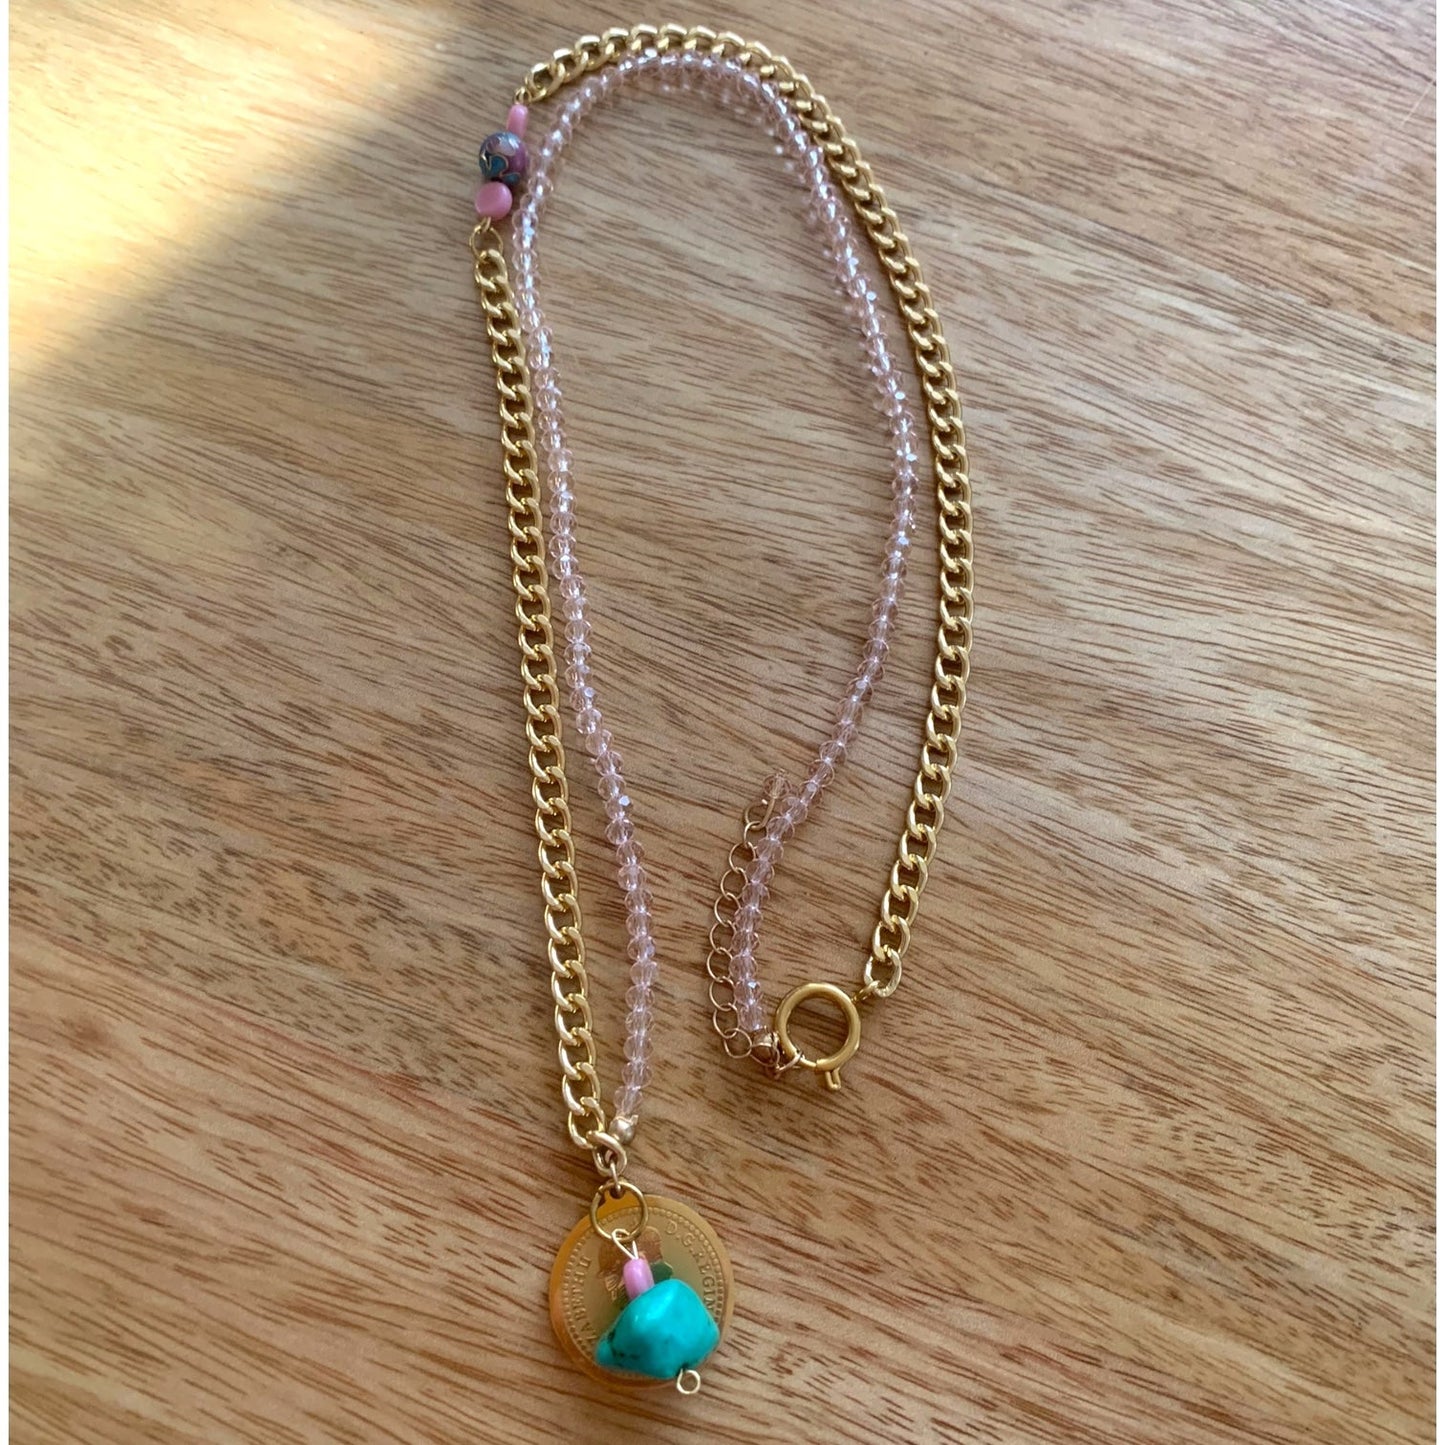 1 of 1 Bespoke Soft Pink, Turquoise and Gold Multiwear Statement Necklace-Necklace